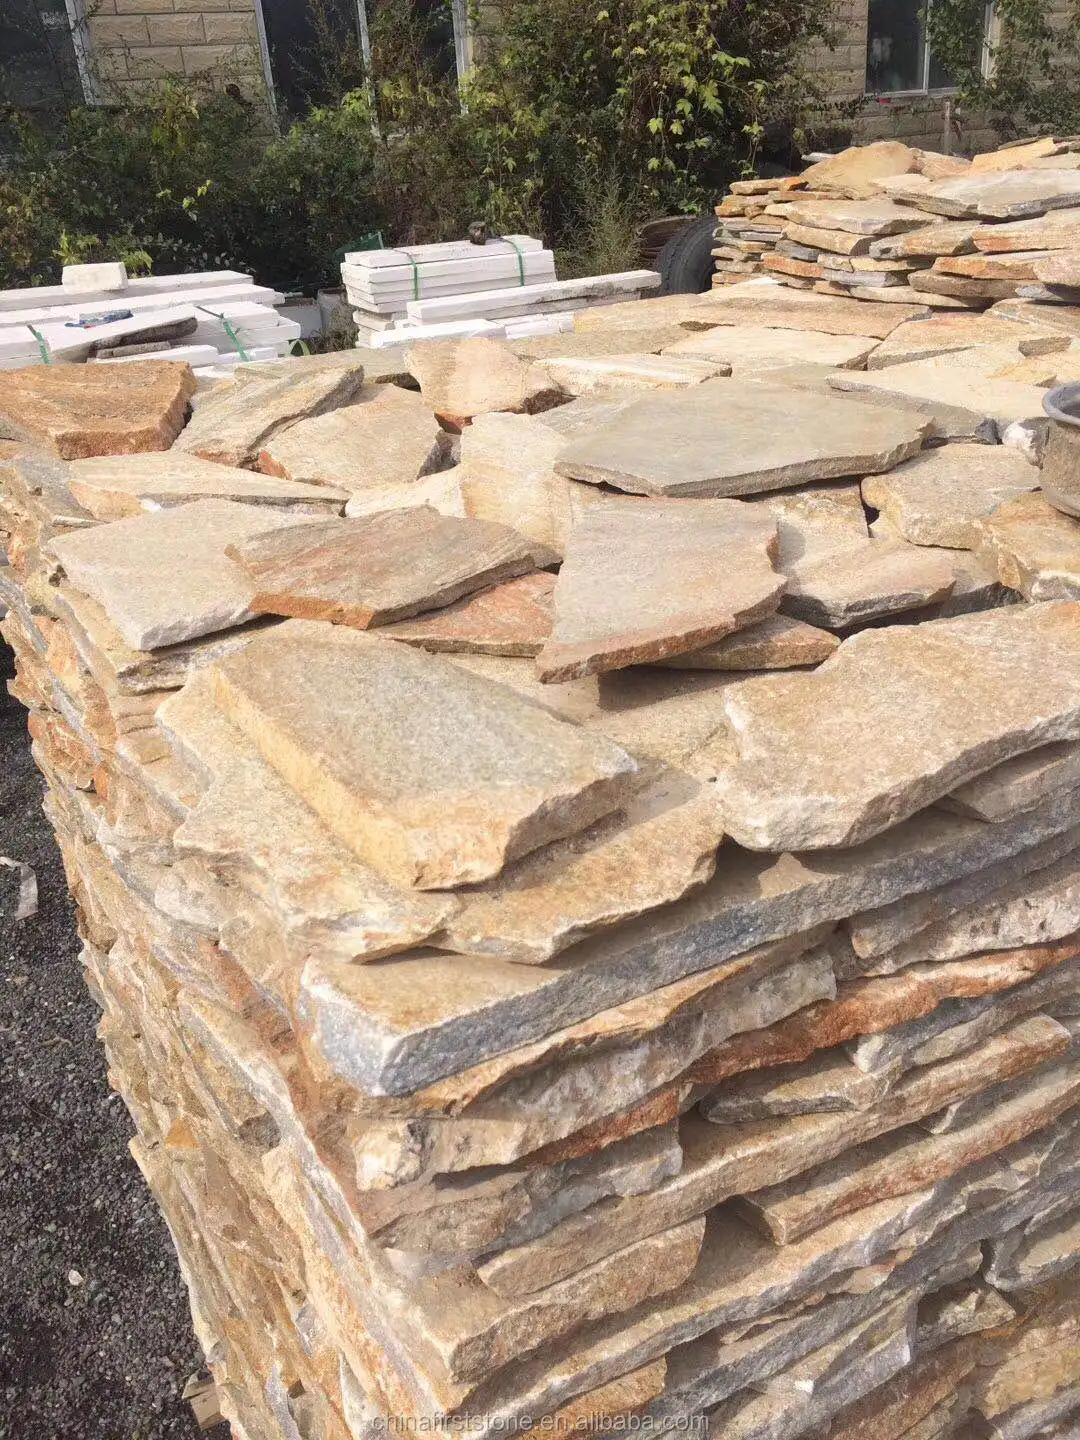 Ivy Beige Rock Step Slate for Garden Retaining Wall & Crazy pattern Coping Construction Project